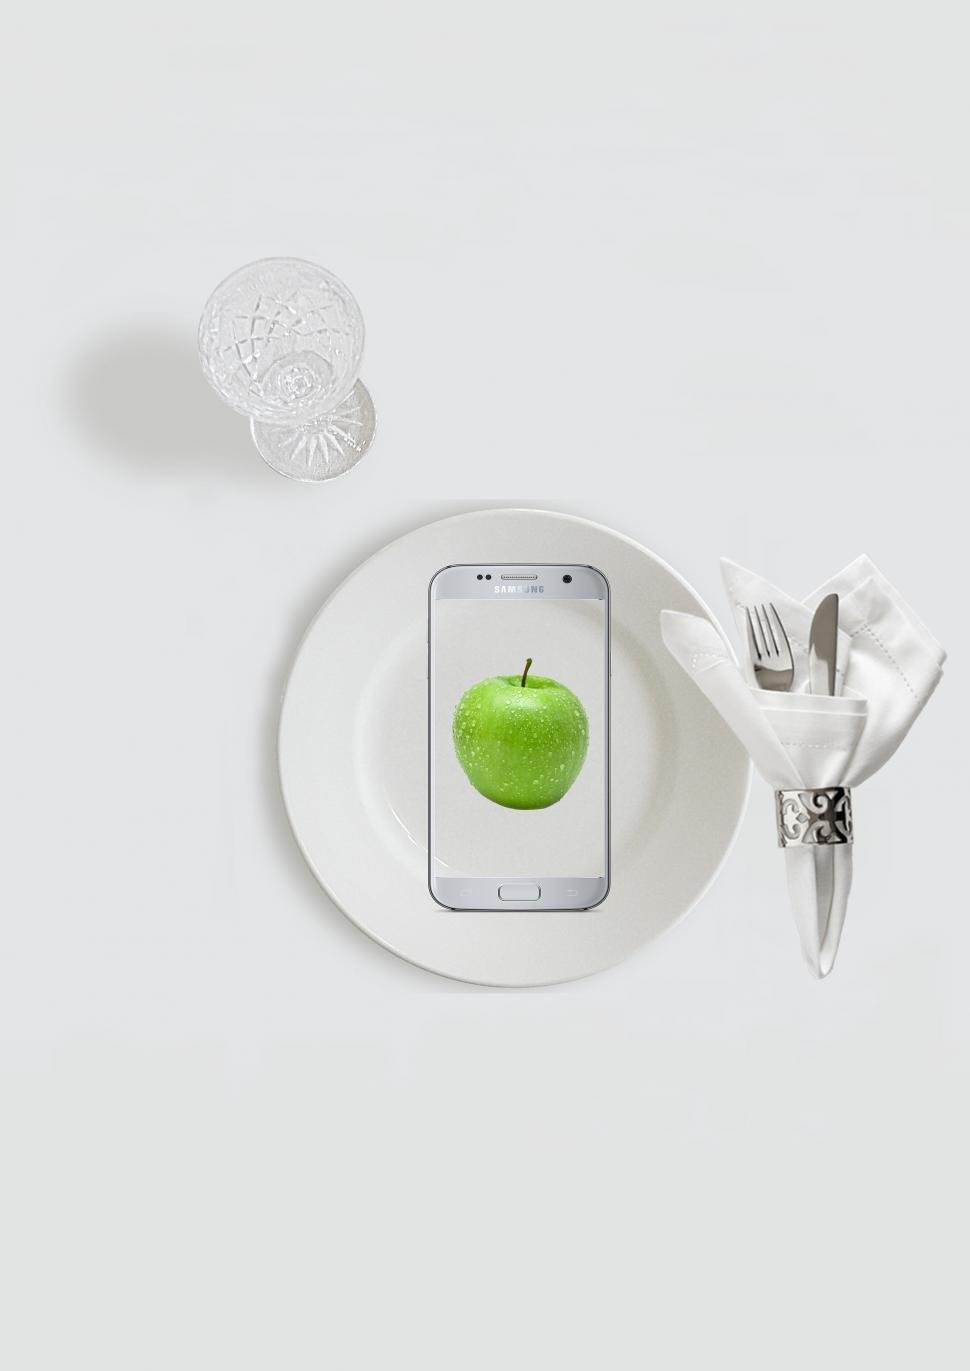 Free Image of Smartphone and Cutlery With Glass - Photomontage 